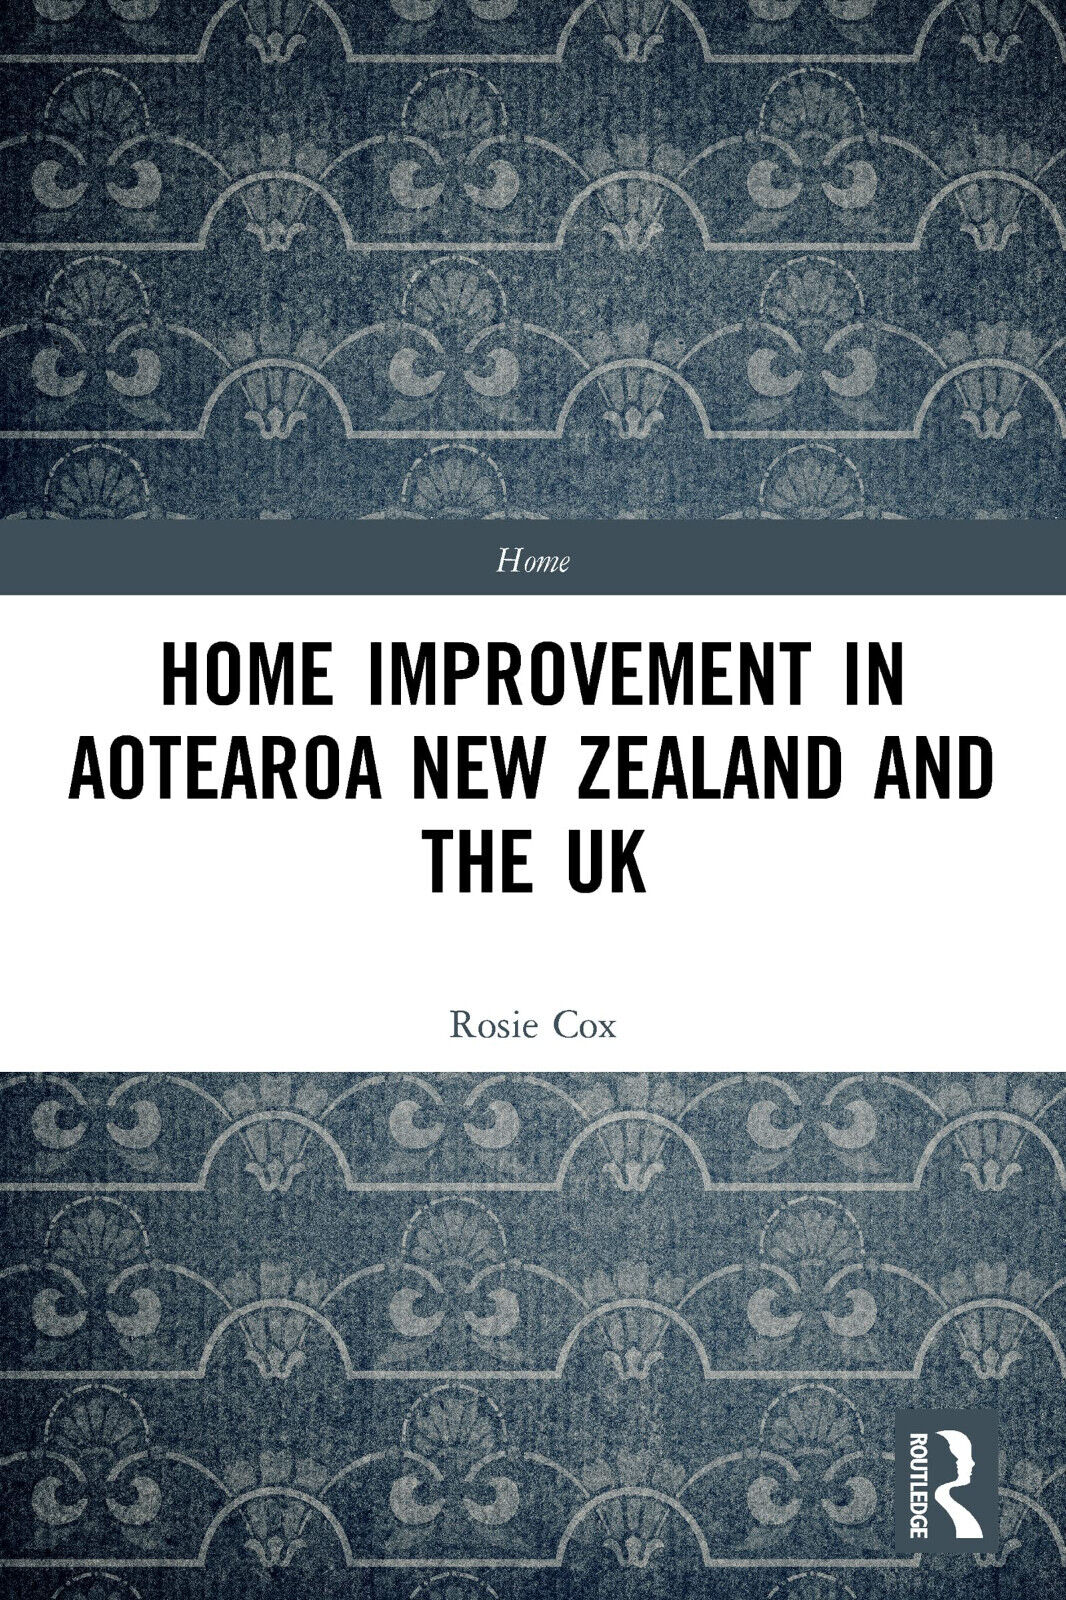 Home Improvement In Aotearoa New Zealand And The UK - Rosie Cox - 2021